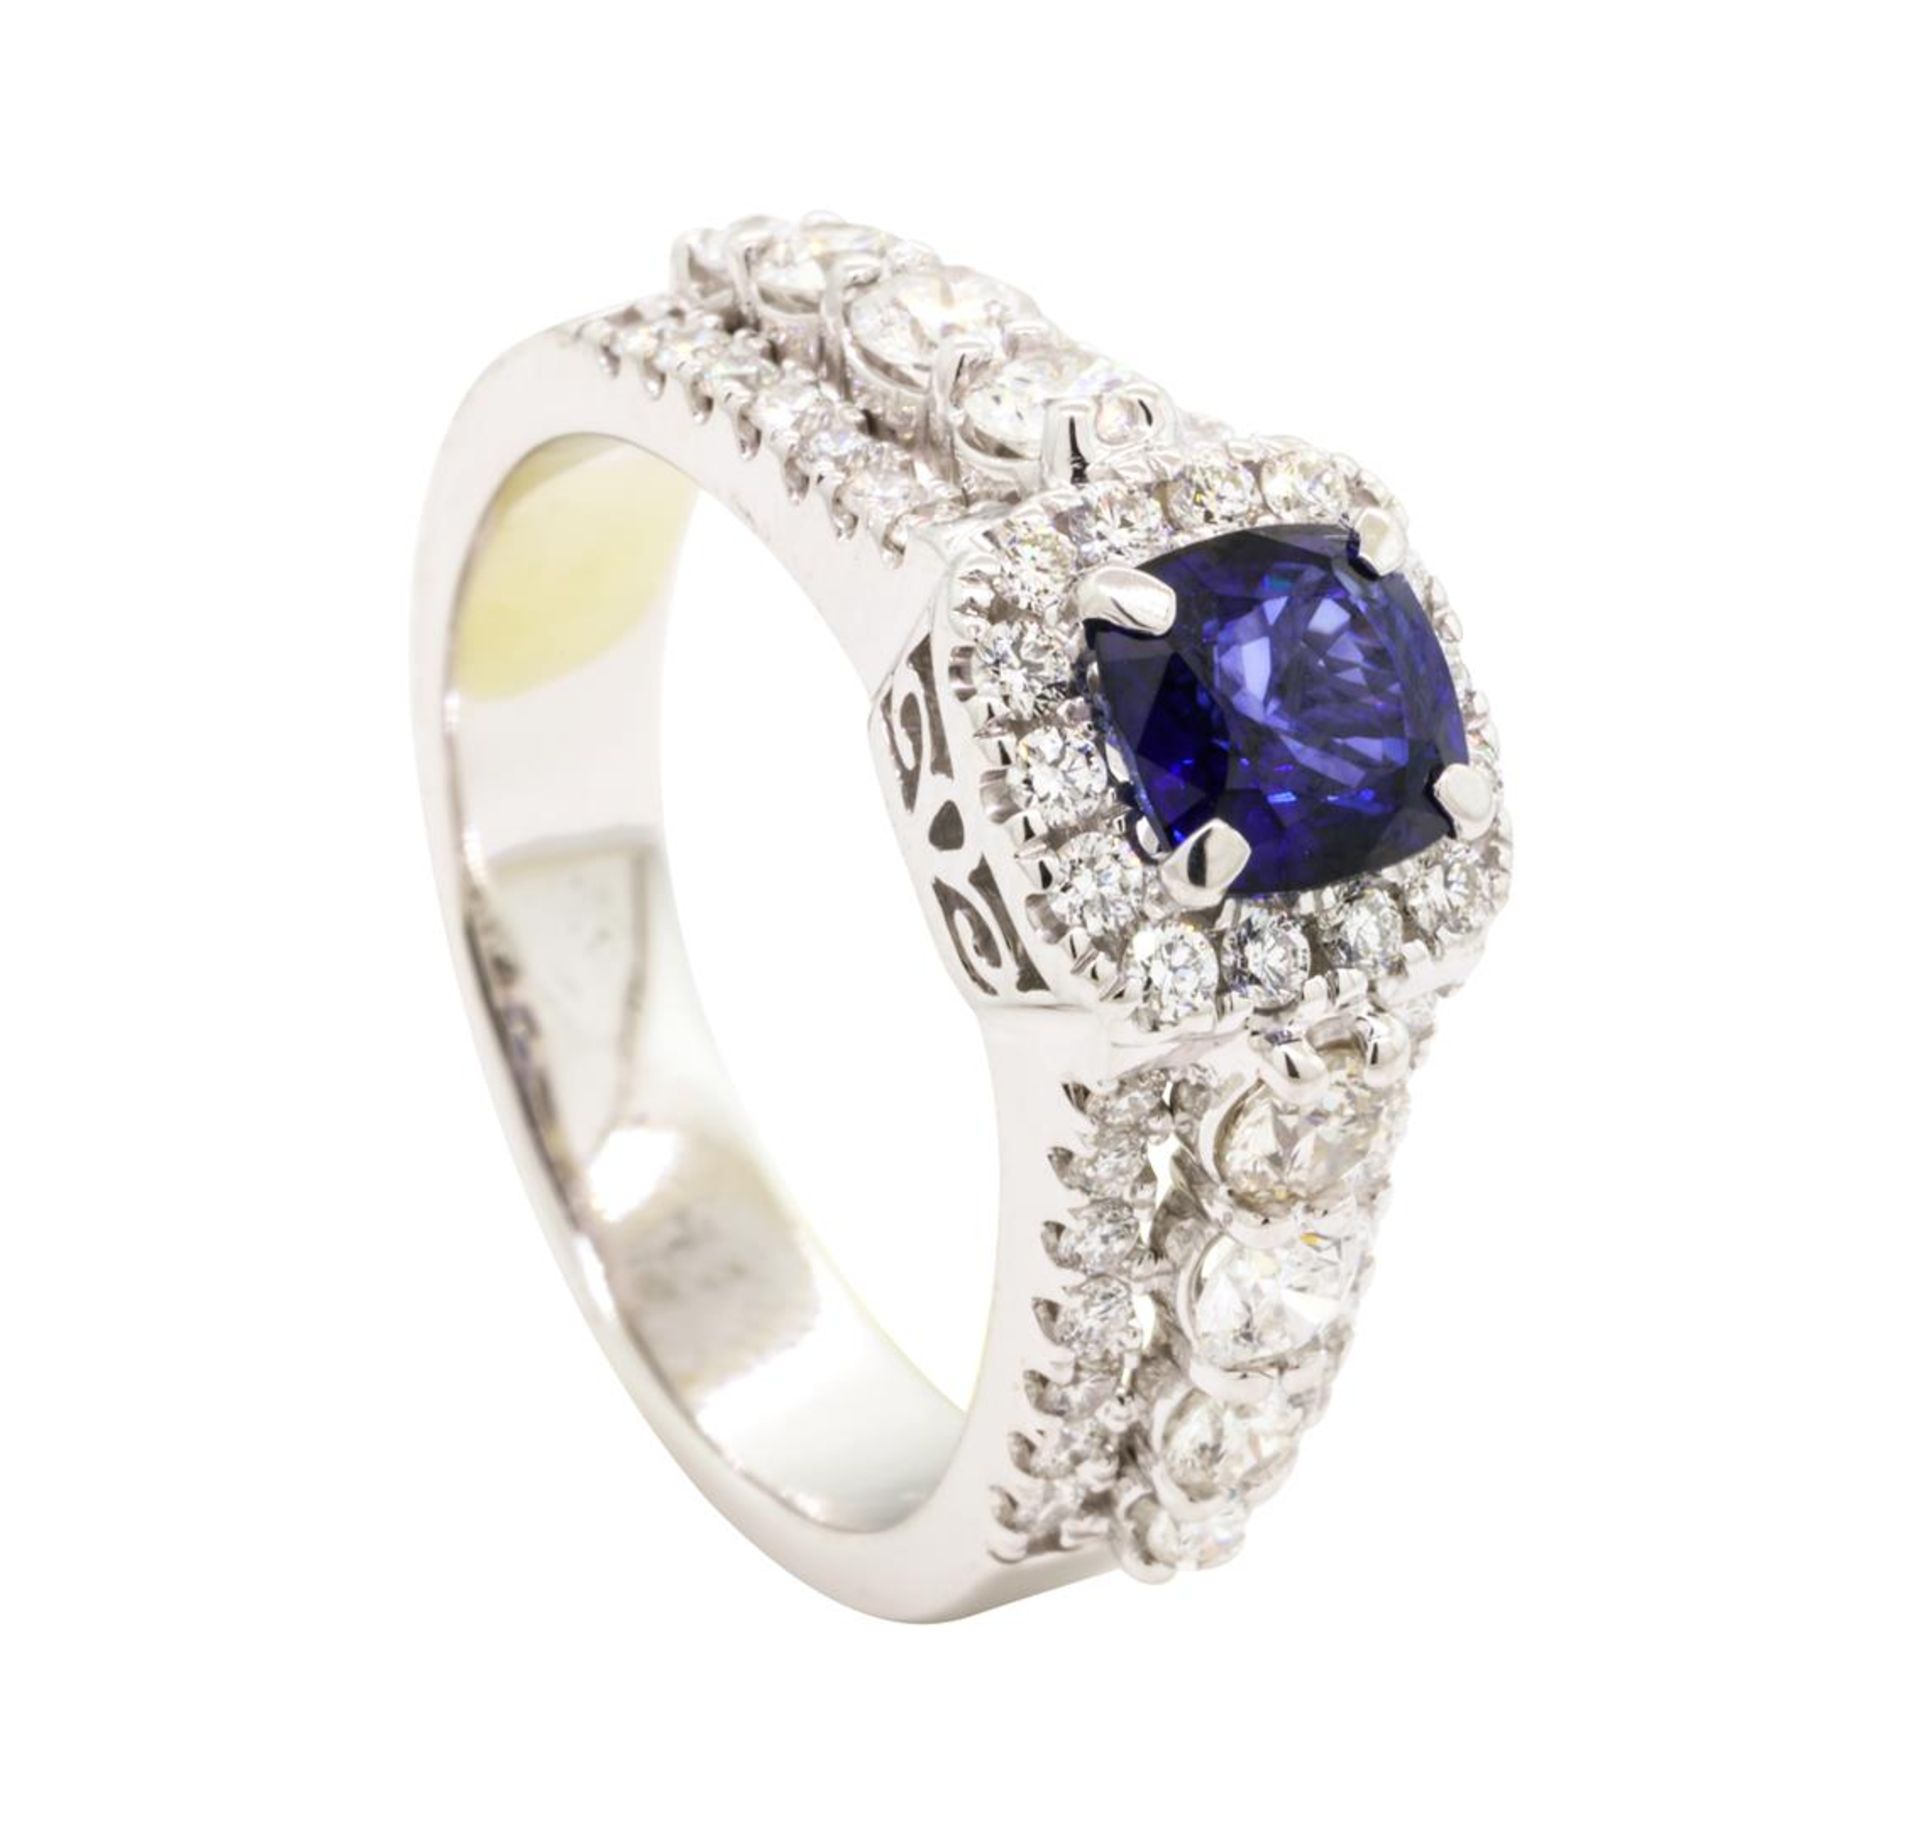 1.86 ctw Sapphire and Diamond Ring - 14KT White Gold - Image 4 of 5